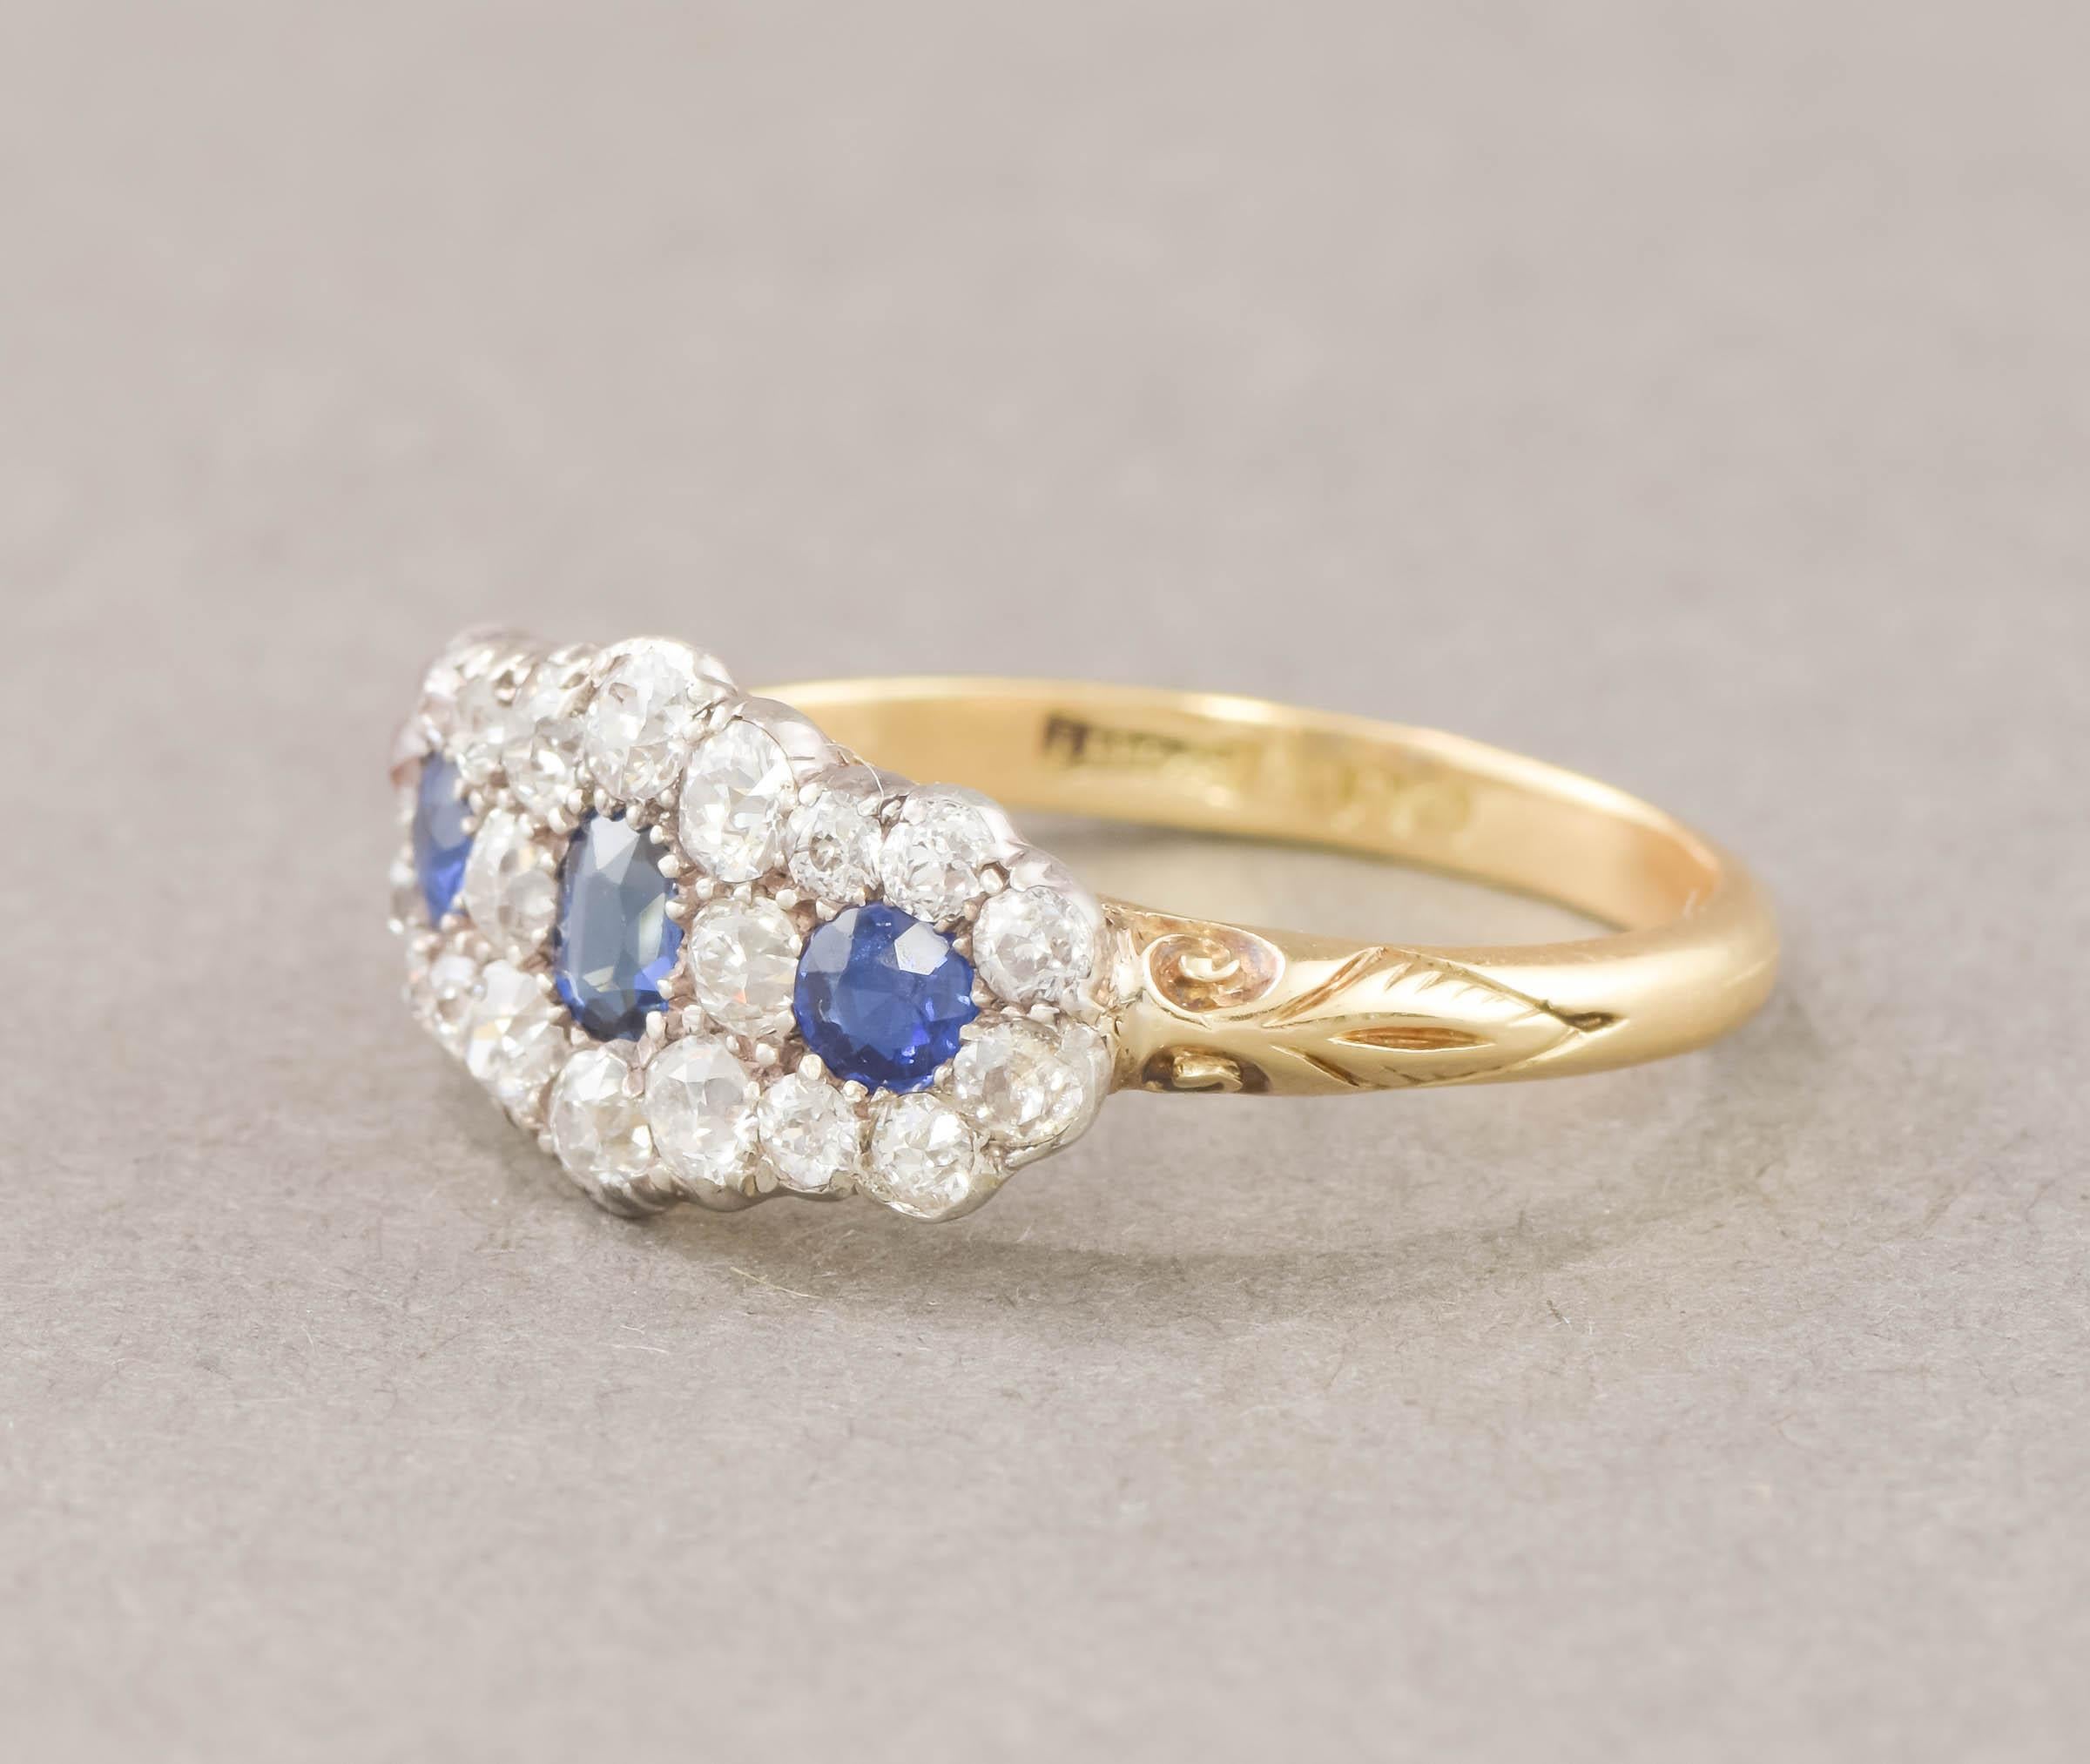 Victorian Antique Sapphire Diamond Triple Flower Ring with Old European Cut Diamonds For Sale